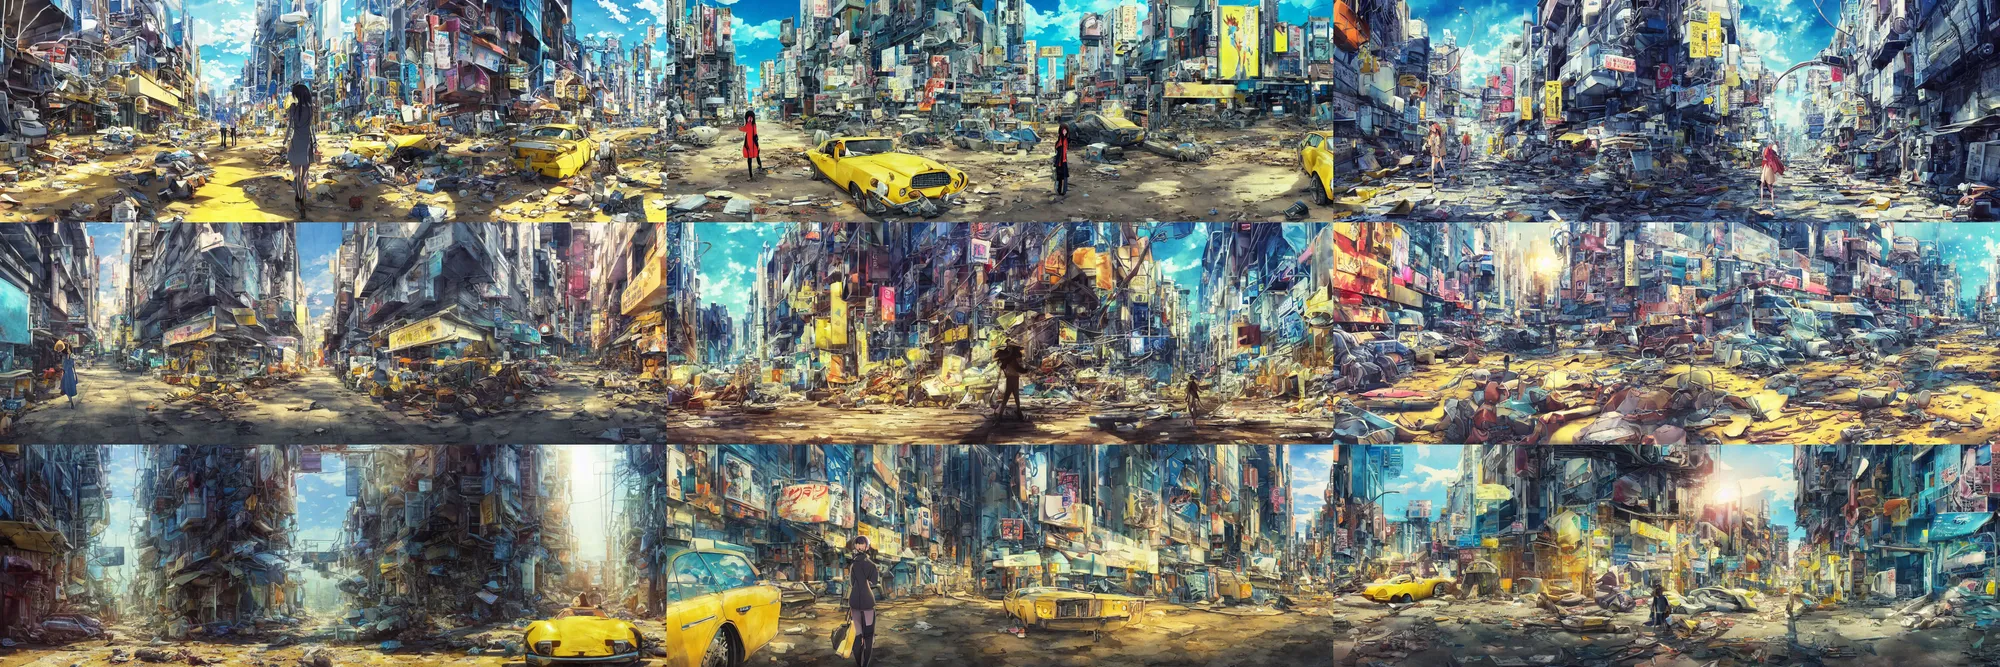 Prompt: incredible anime movie scene, ultra wide, vanishing point, hoody woman explorer, watercolor, underwater market, empty road, coral reef, billboards, harsh bloom lighting, rim light, abandoned city, paper texture, movie scene, caustic shadows, deserted shinjuku junk town, bright sun ground, wires, telephone pole, pipes, yellow, red, dusty